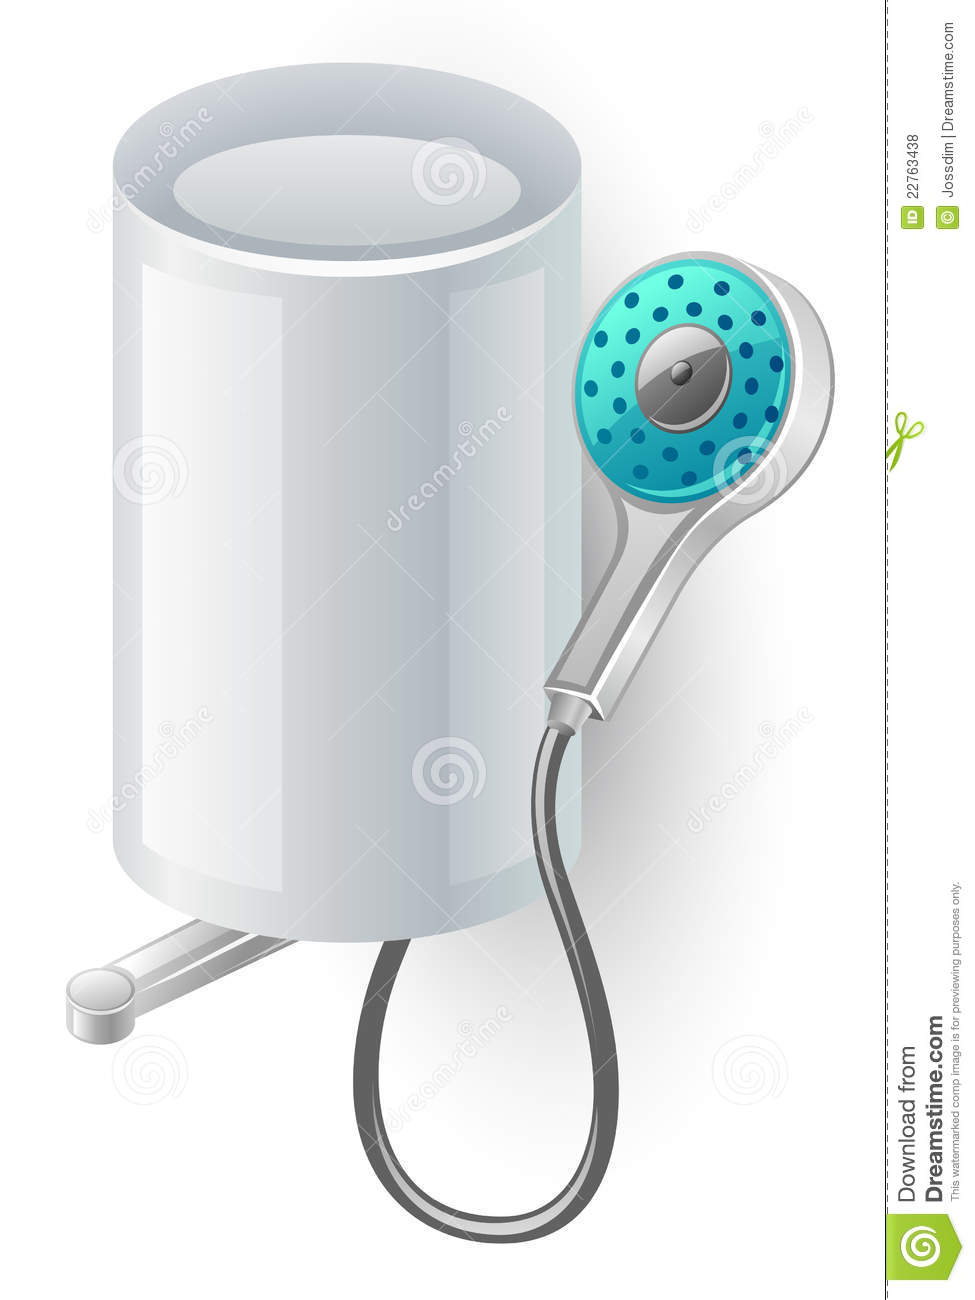 Water Heater Royalty Free Stock Photos   Image  22763438